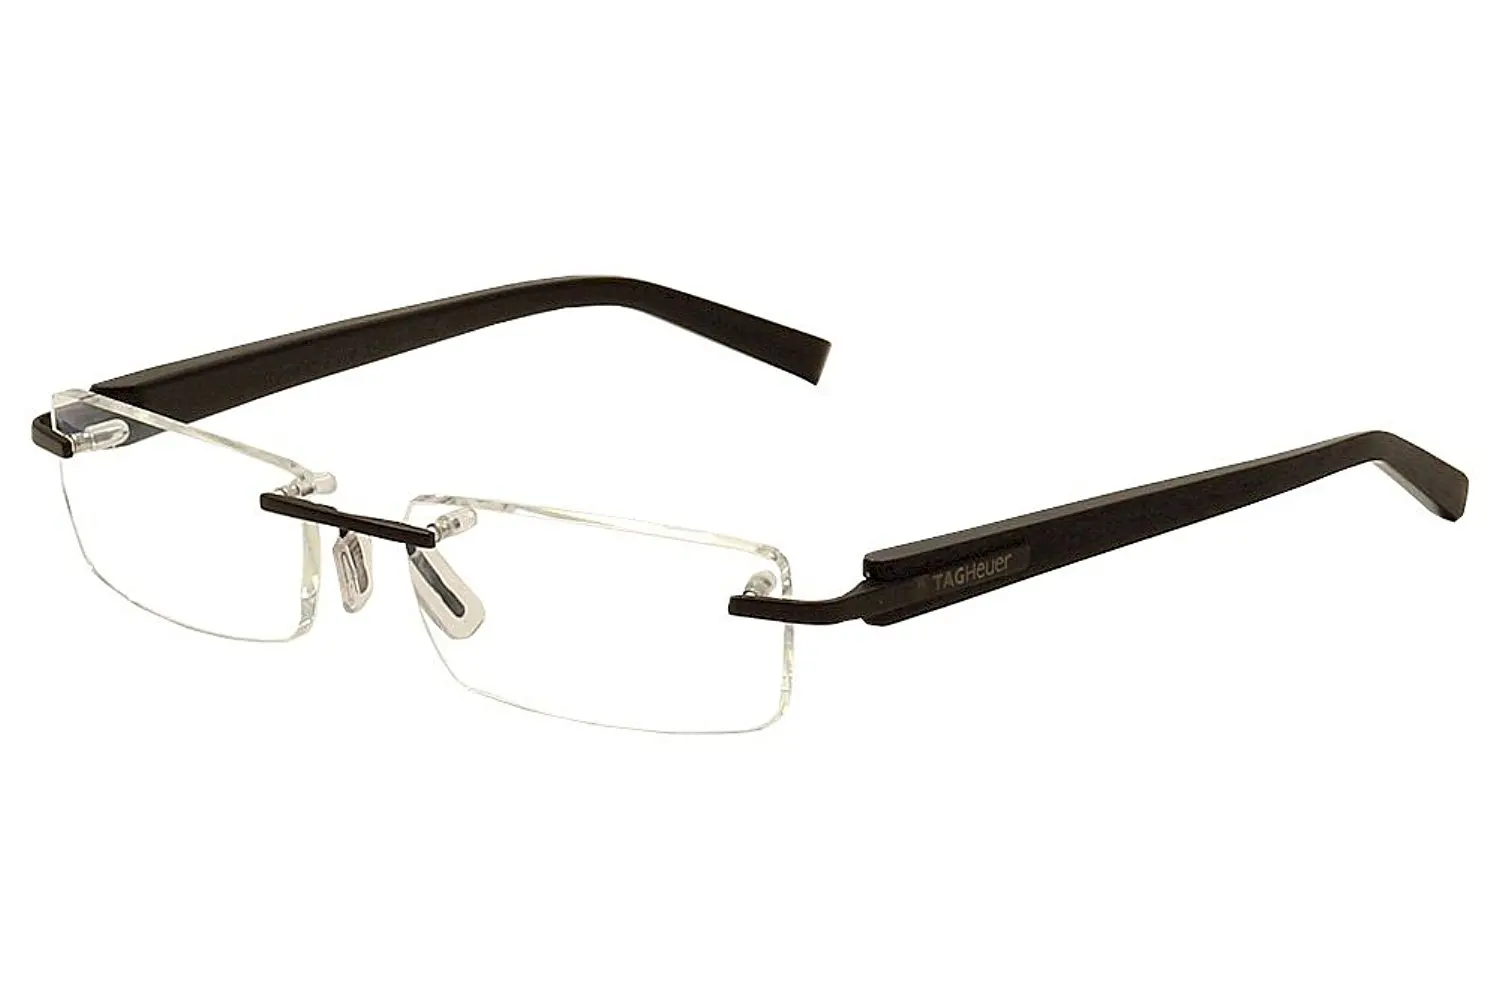 Cheap Tag Heuer Eyeglasses, find Tag Heuer Eyeglasses deals on line at ...